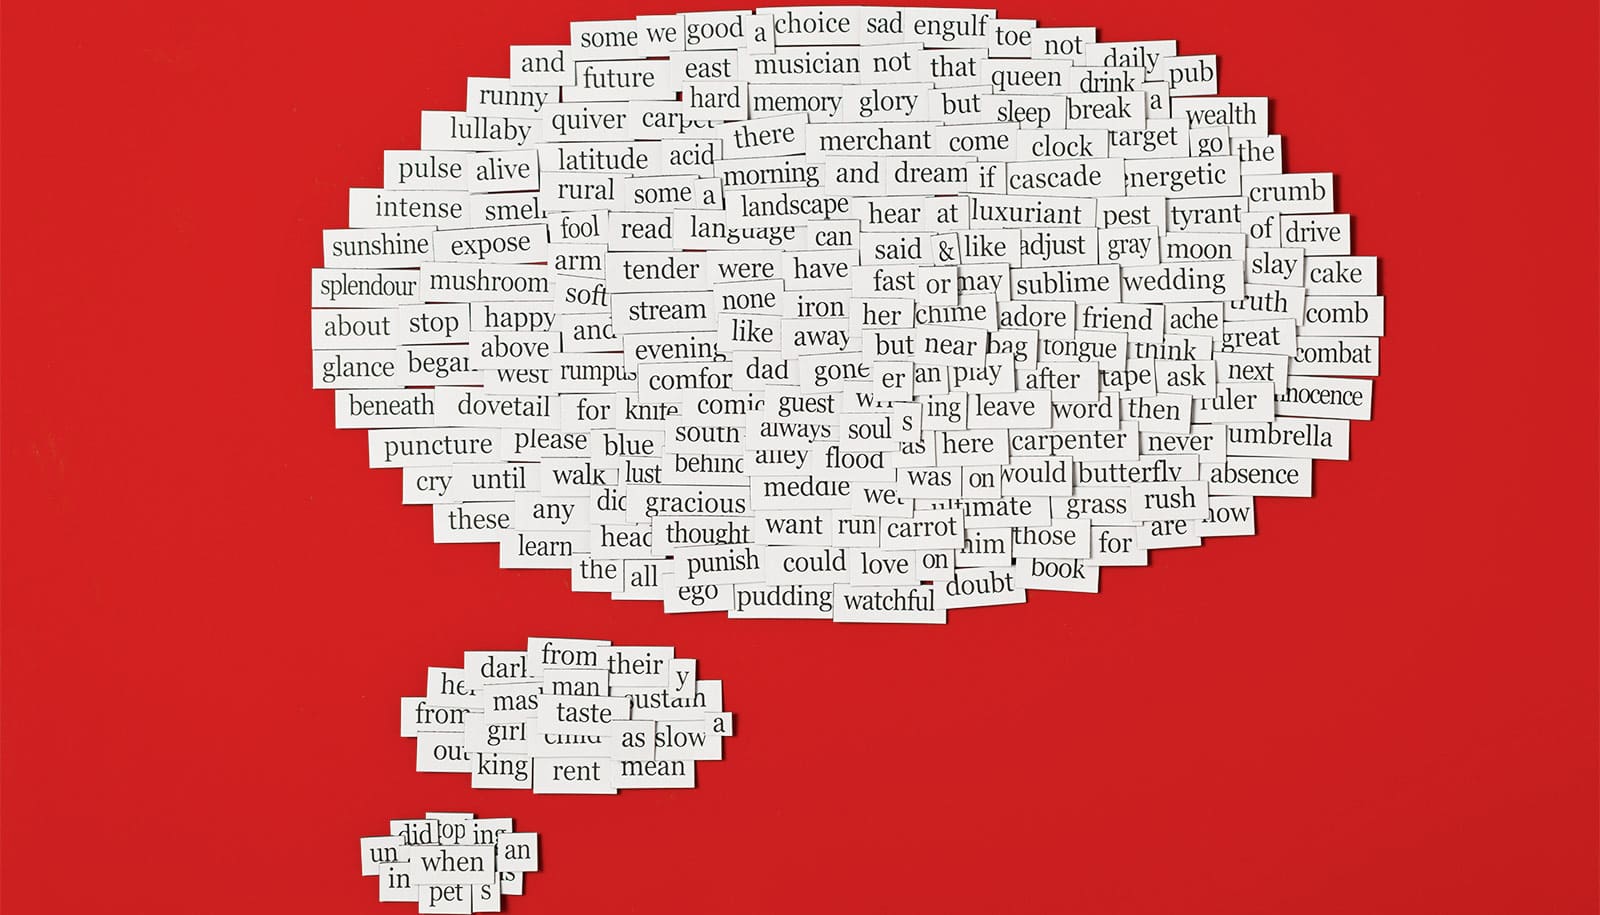 White fridge magnets with words in black text on them arranged into a thought bubble shape on a red background.